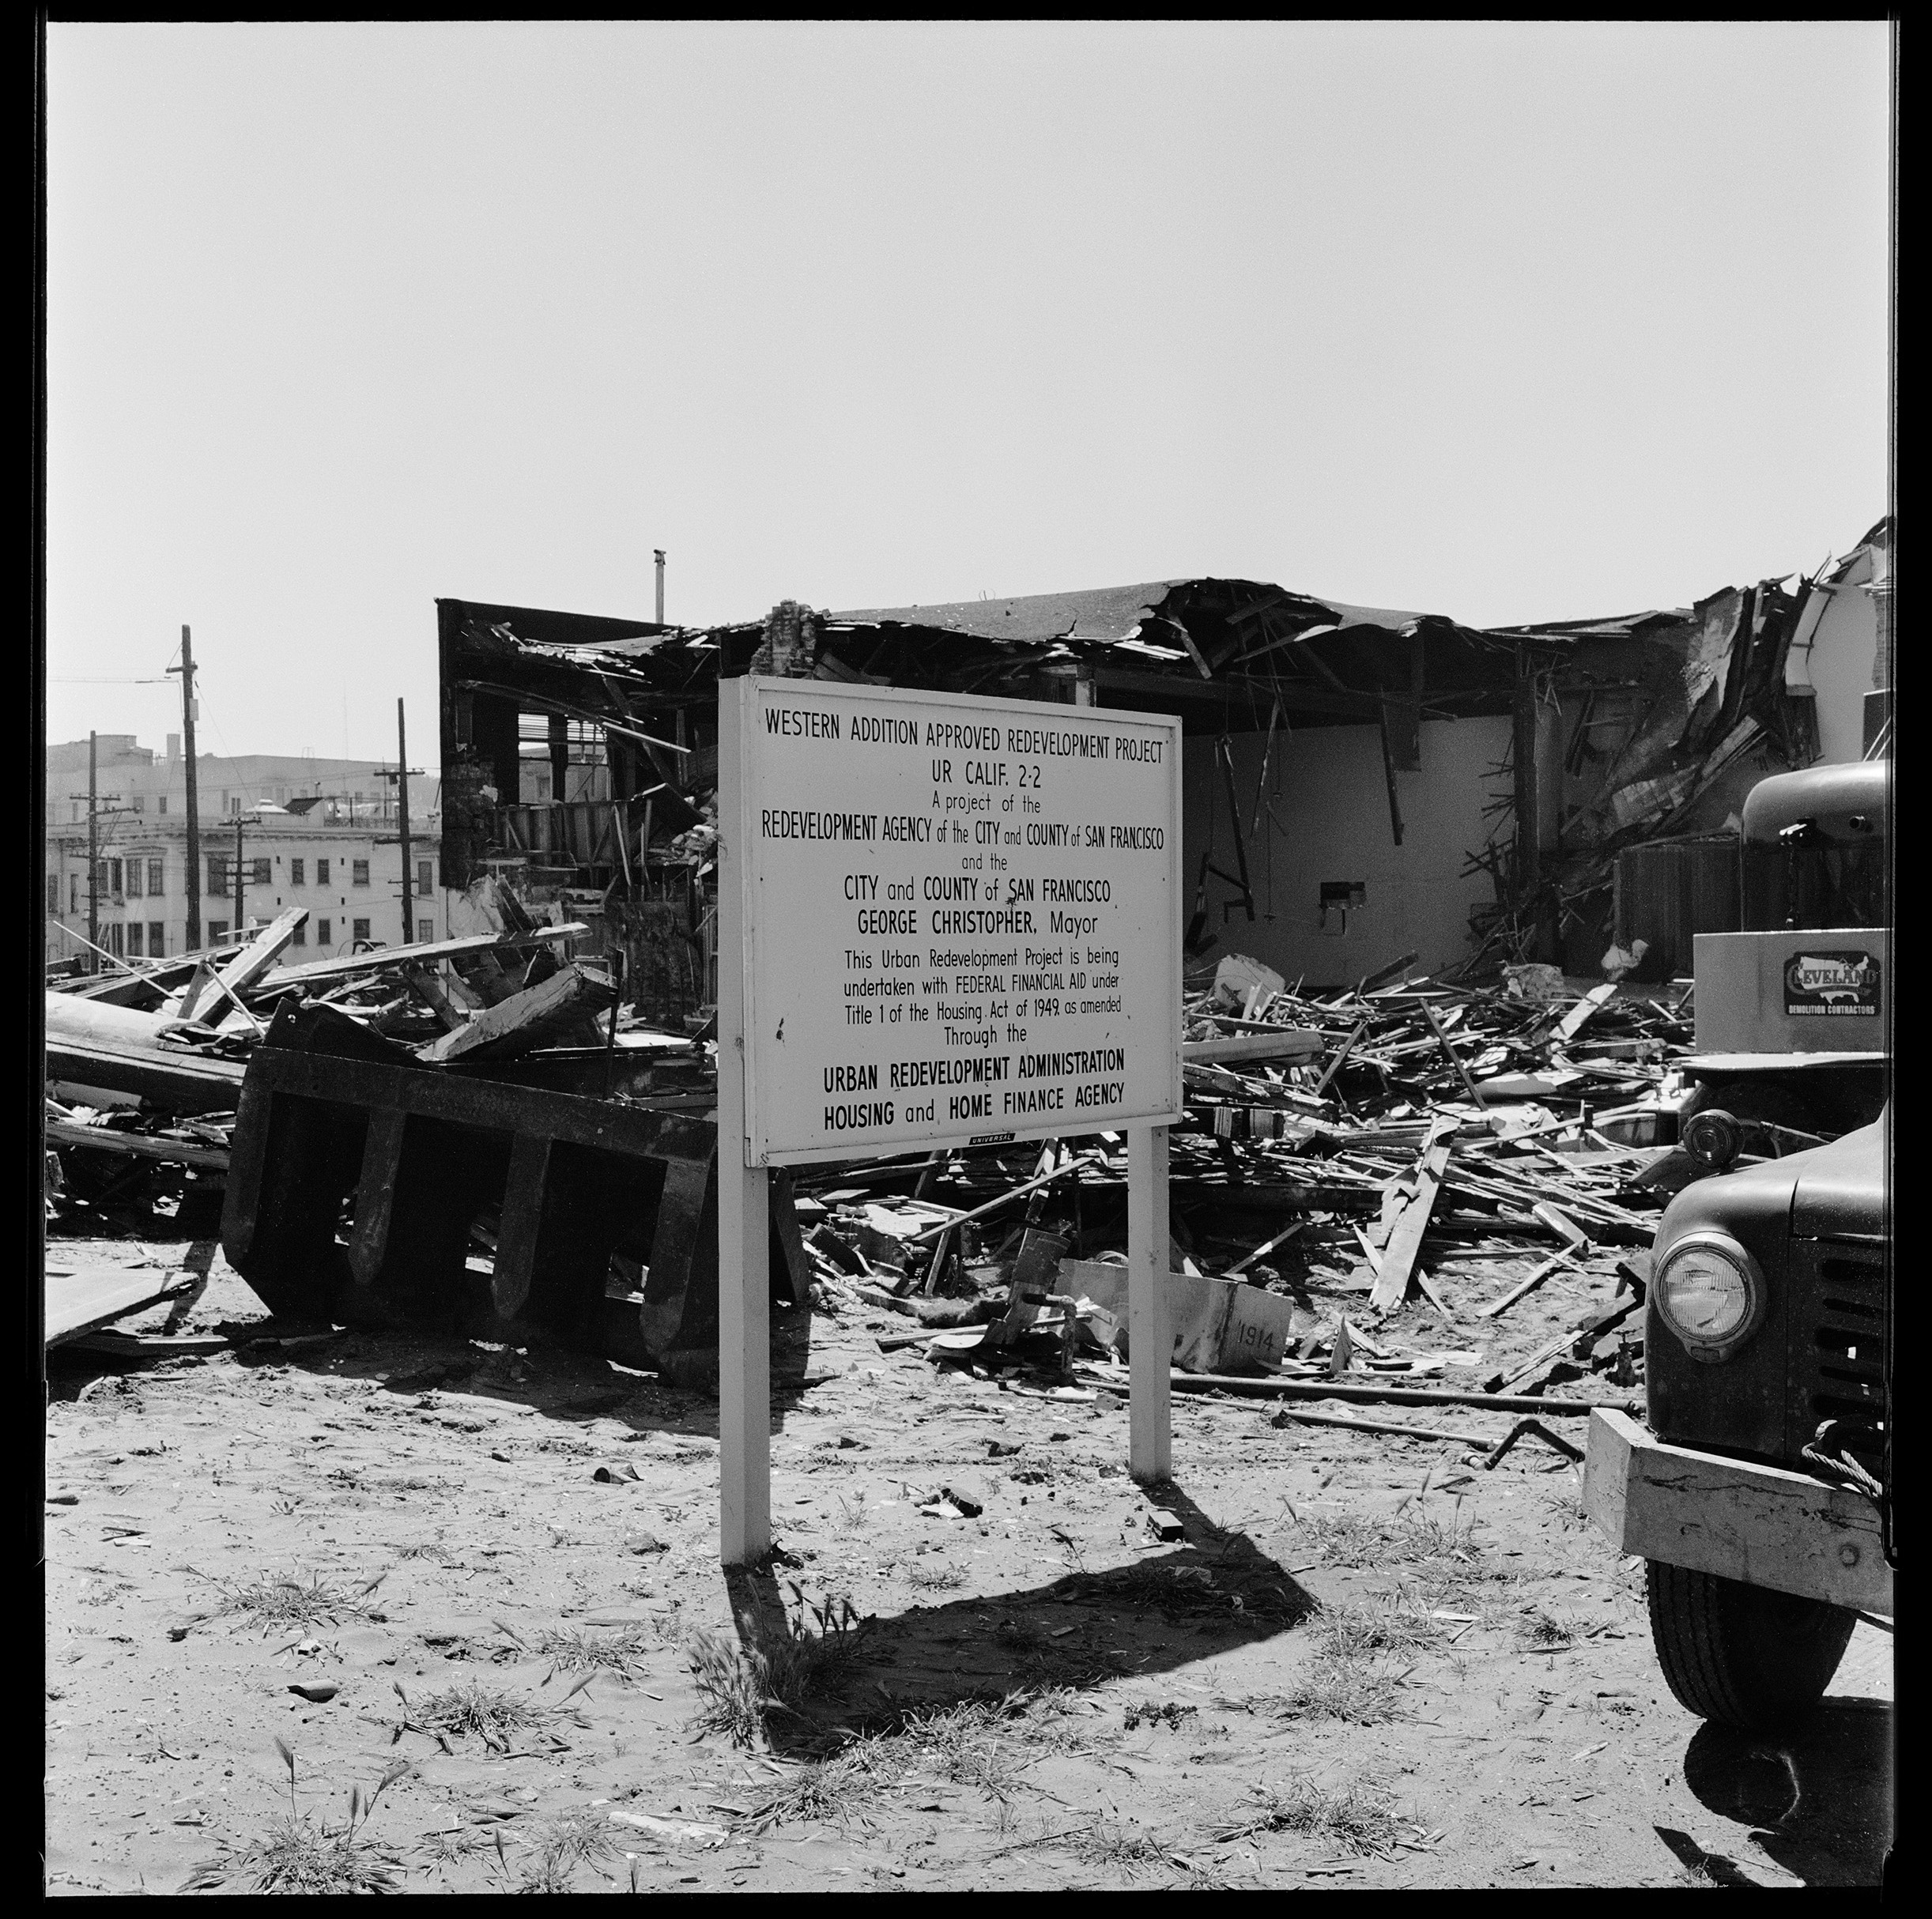 A black and white photo shows a demolished building with a sign about redevelopment.